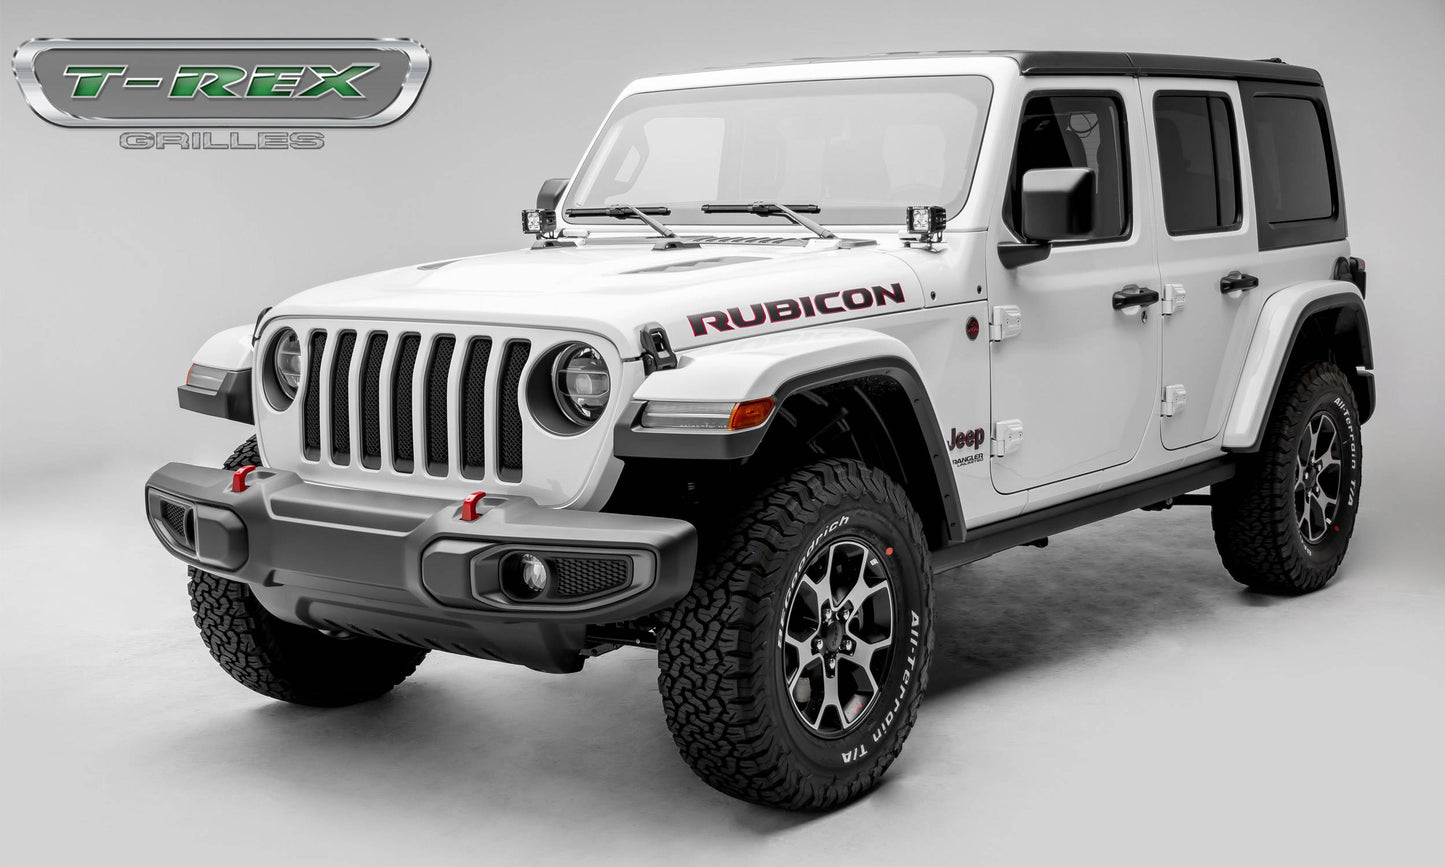 T-REX Grilles 46493 Black Mild Steel Small Mesh Grille Fits 2020-2023 Jeep Gladiator Overland Gladiator Rubicon